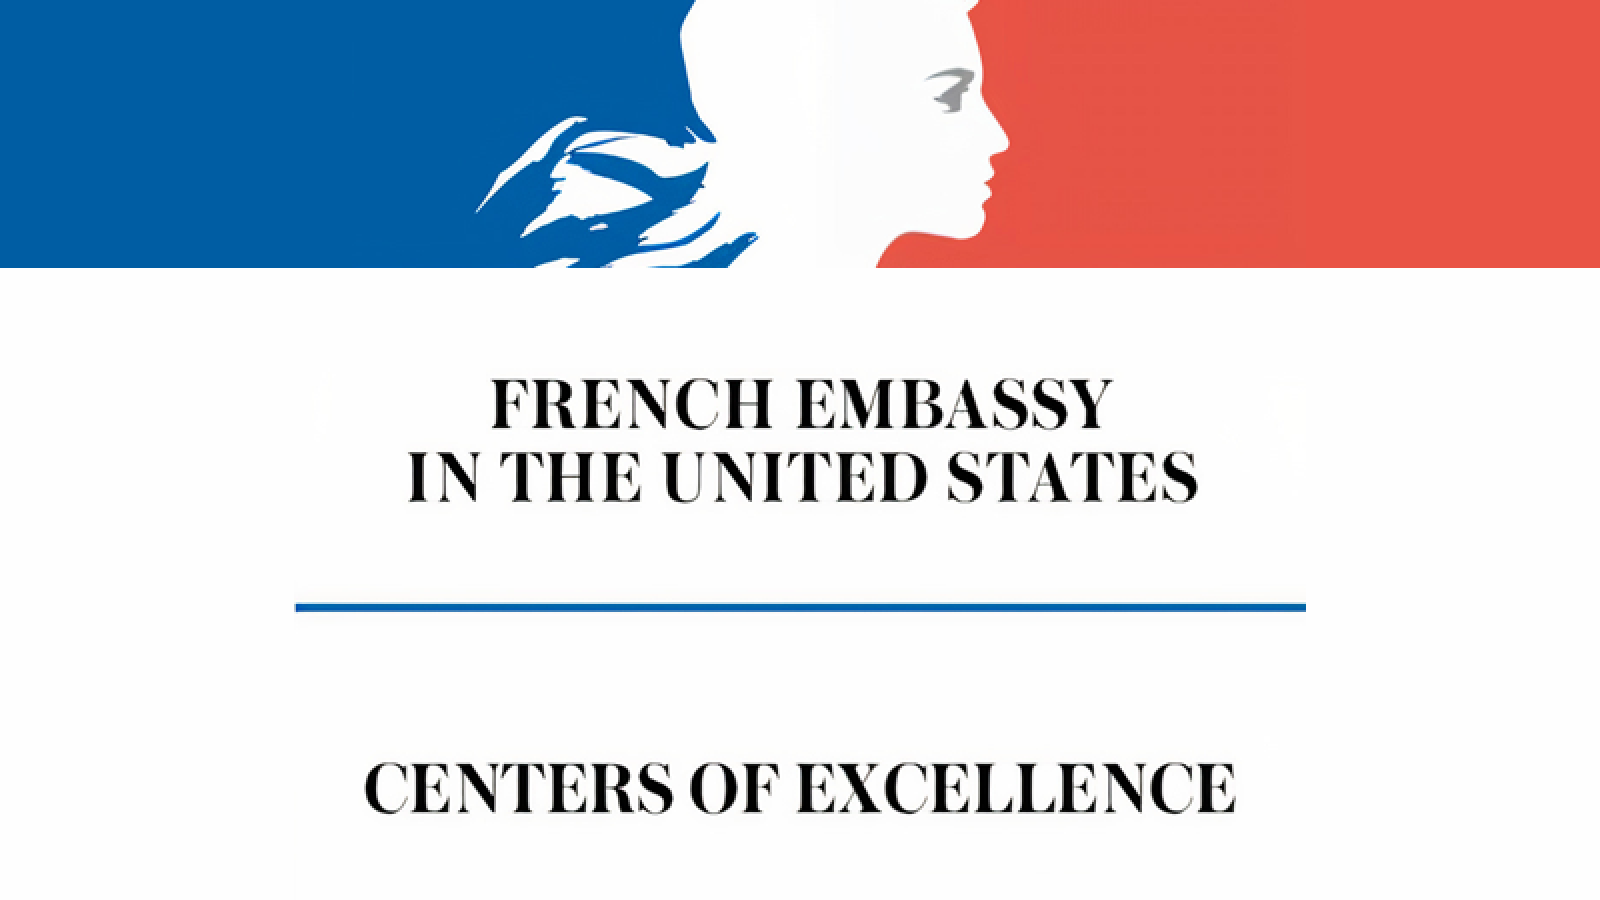 french embassy in the united states centers of excellence